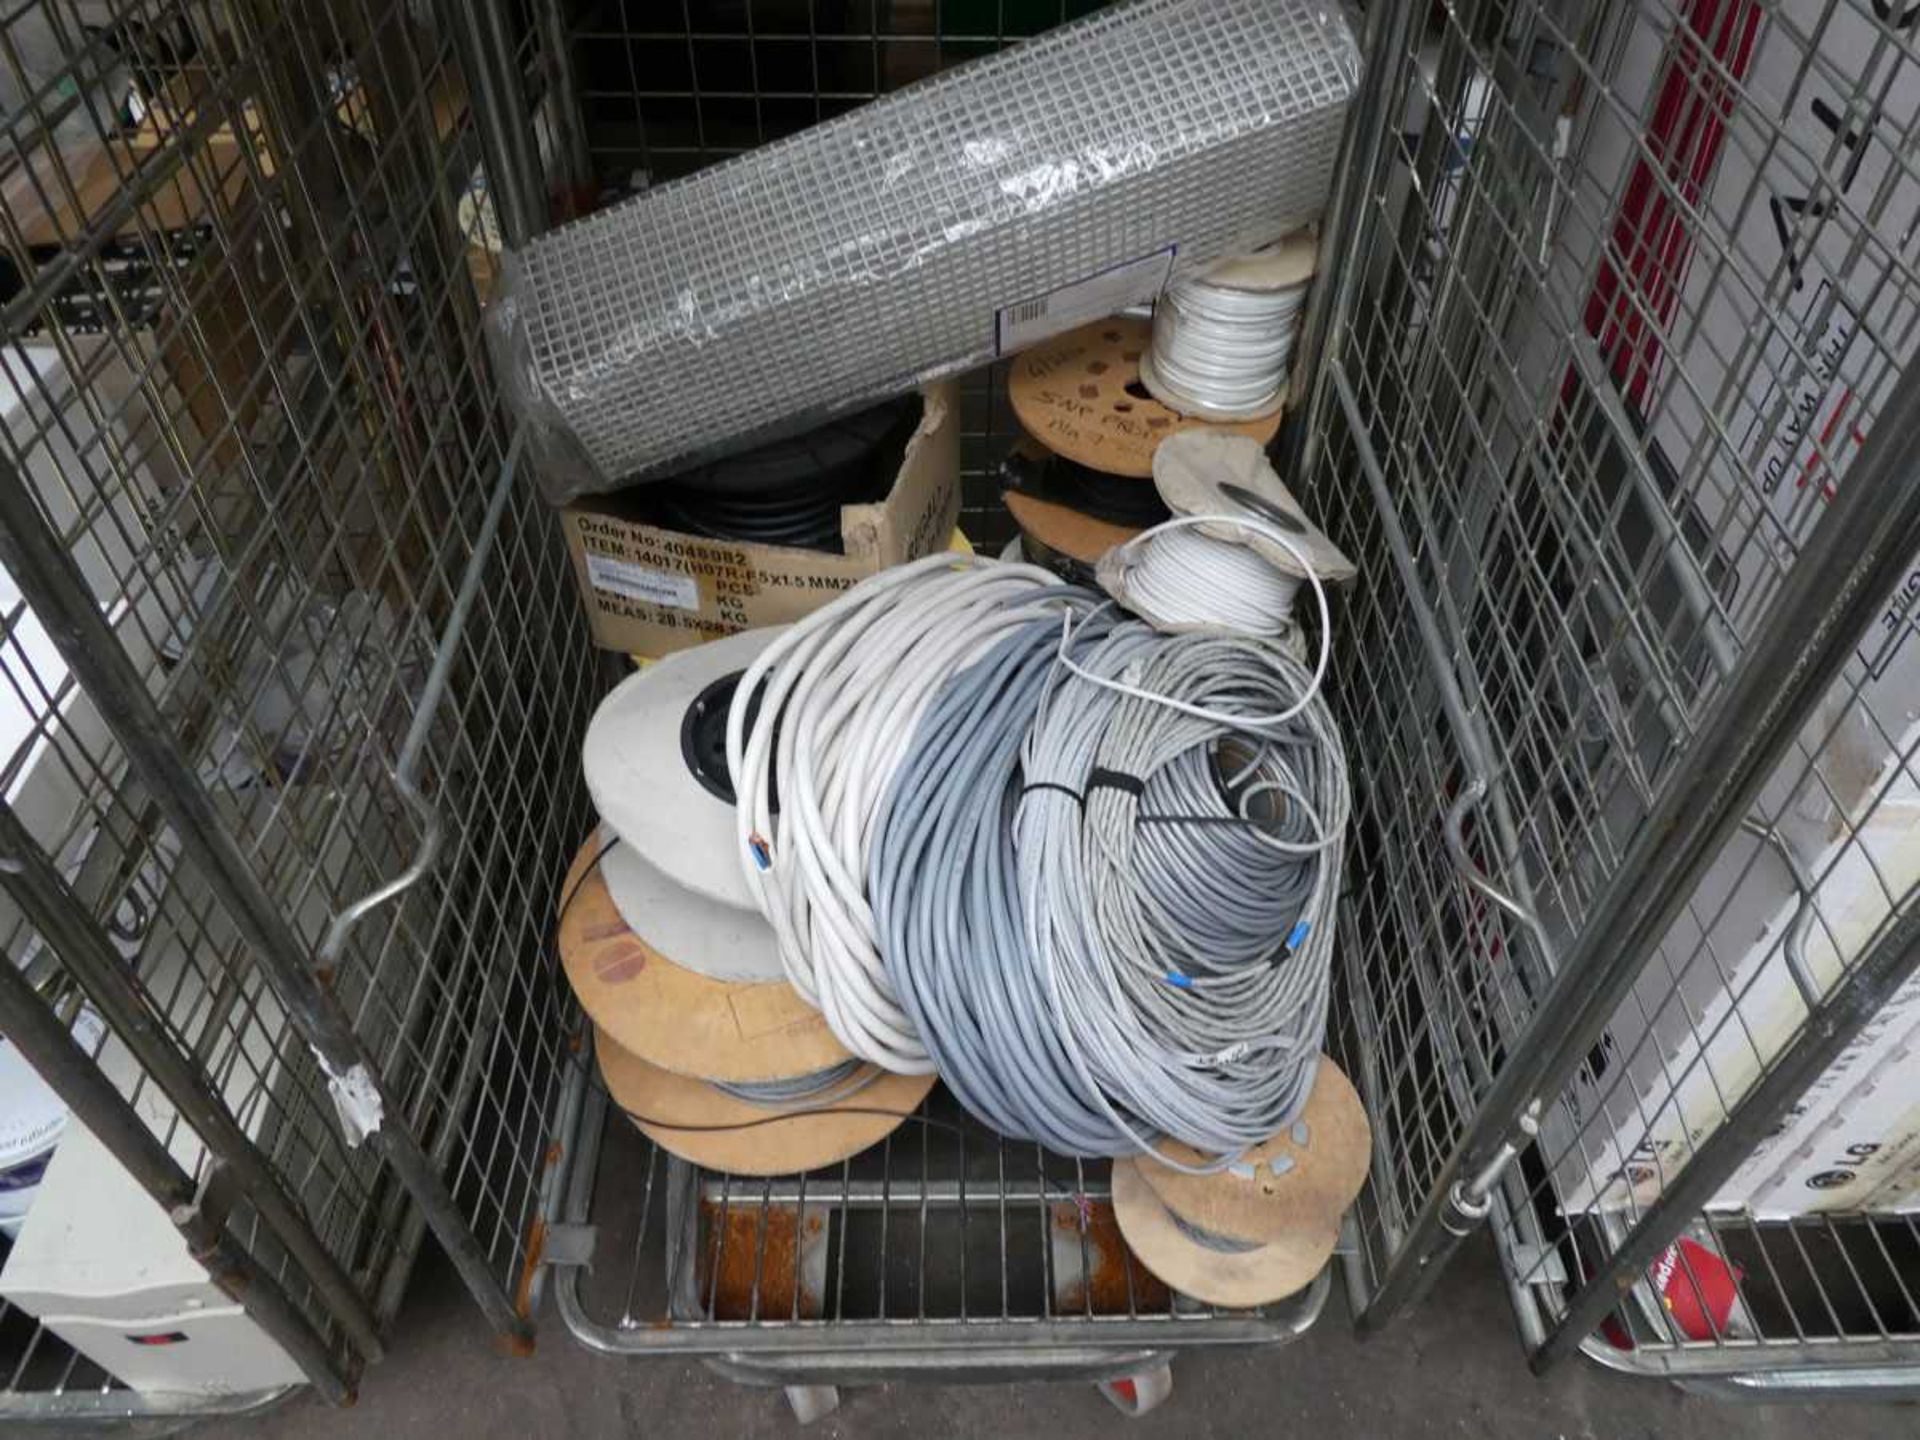 +VAT Quantity of cables including CAT5E, Multicore, and other mains cabling, plus wire rope etc.